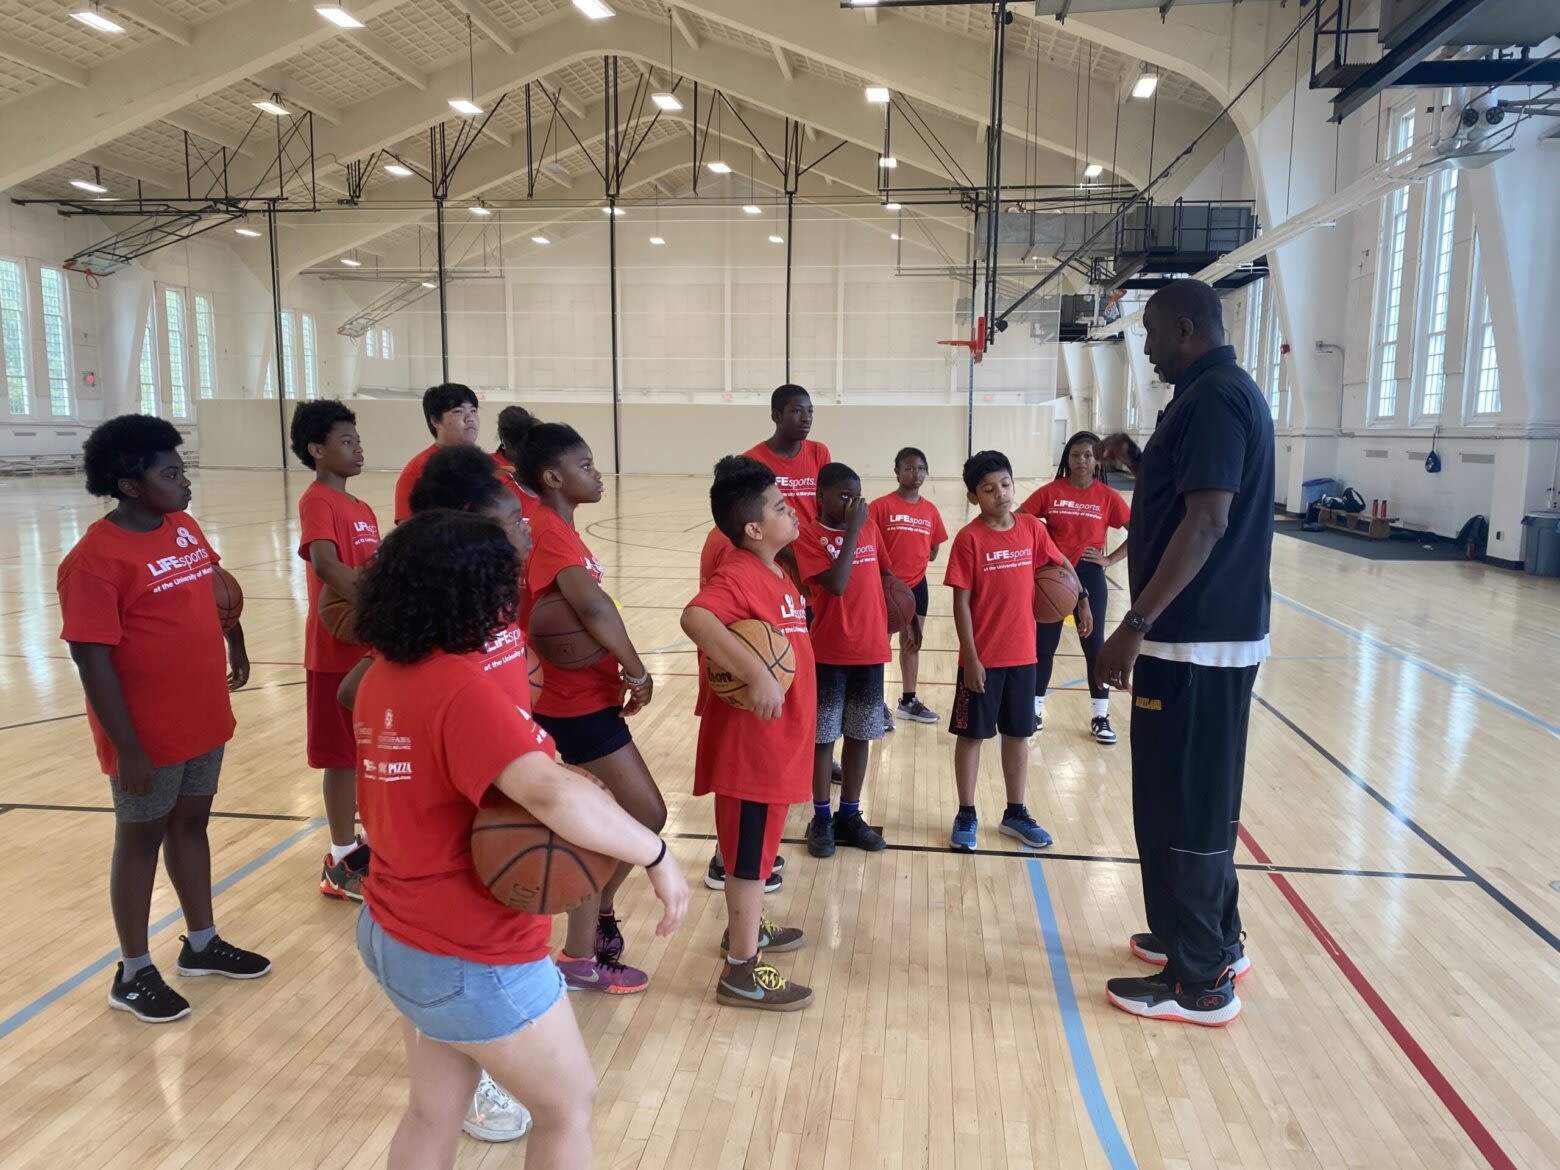 U.Md. summer camp helps middle schoolers with life lessons through sports, with insight from ‘the Wizard’ - WTOP News